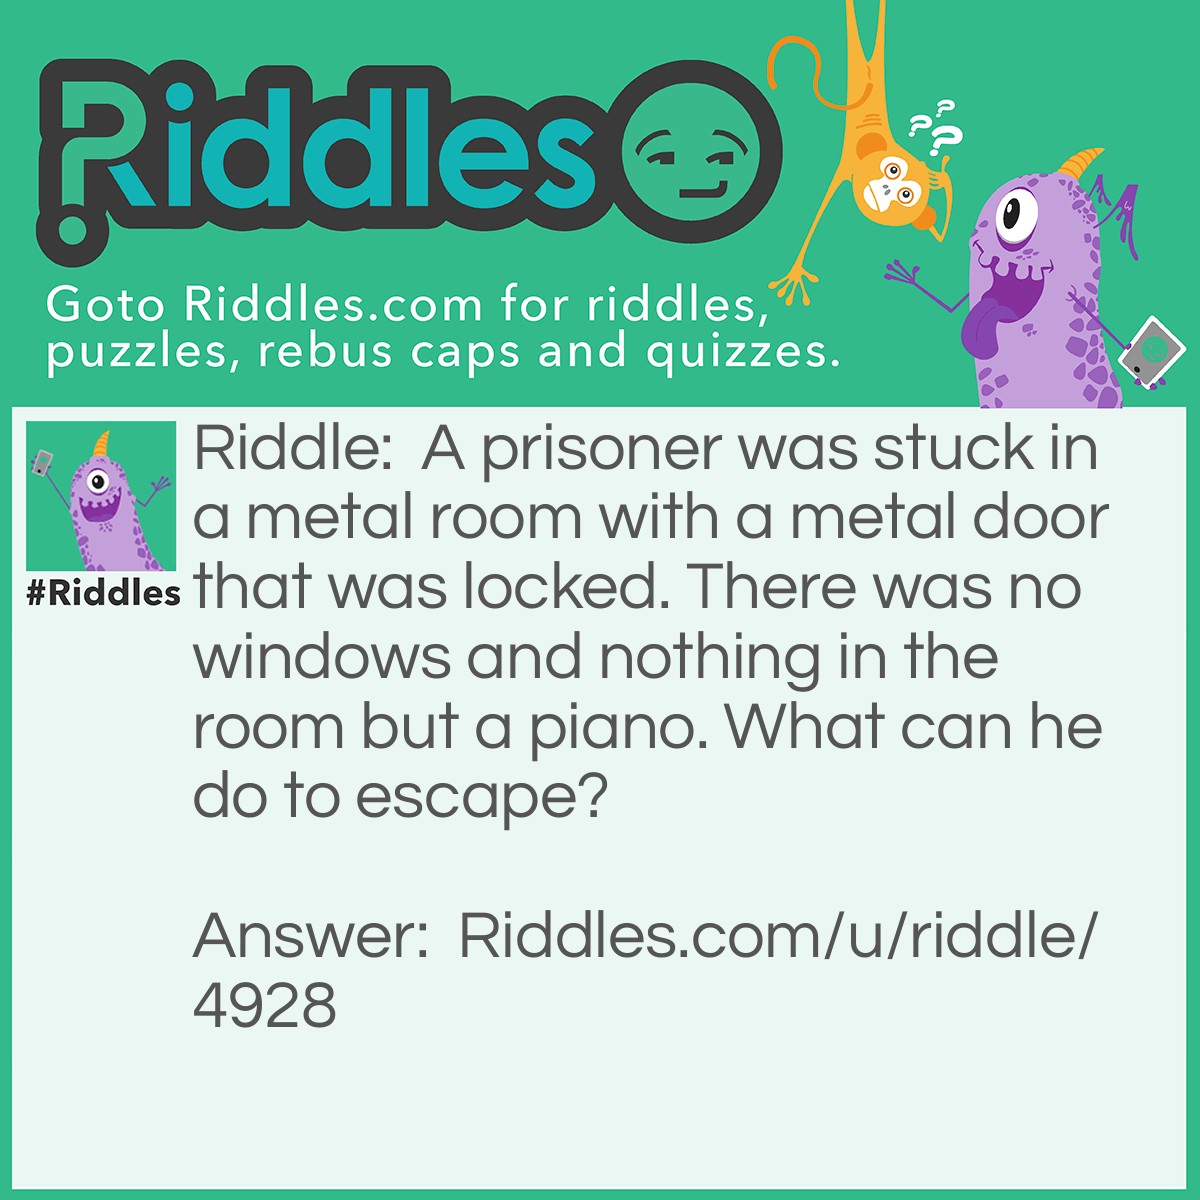 Riddle: A prisoner was stuck in a metal room with a metal door that was locked. There was no windows and nothing in the room but a piano. What can he do to escape? Answer: Play the piano till he finds the right key.